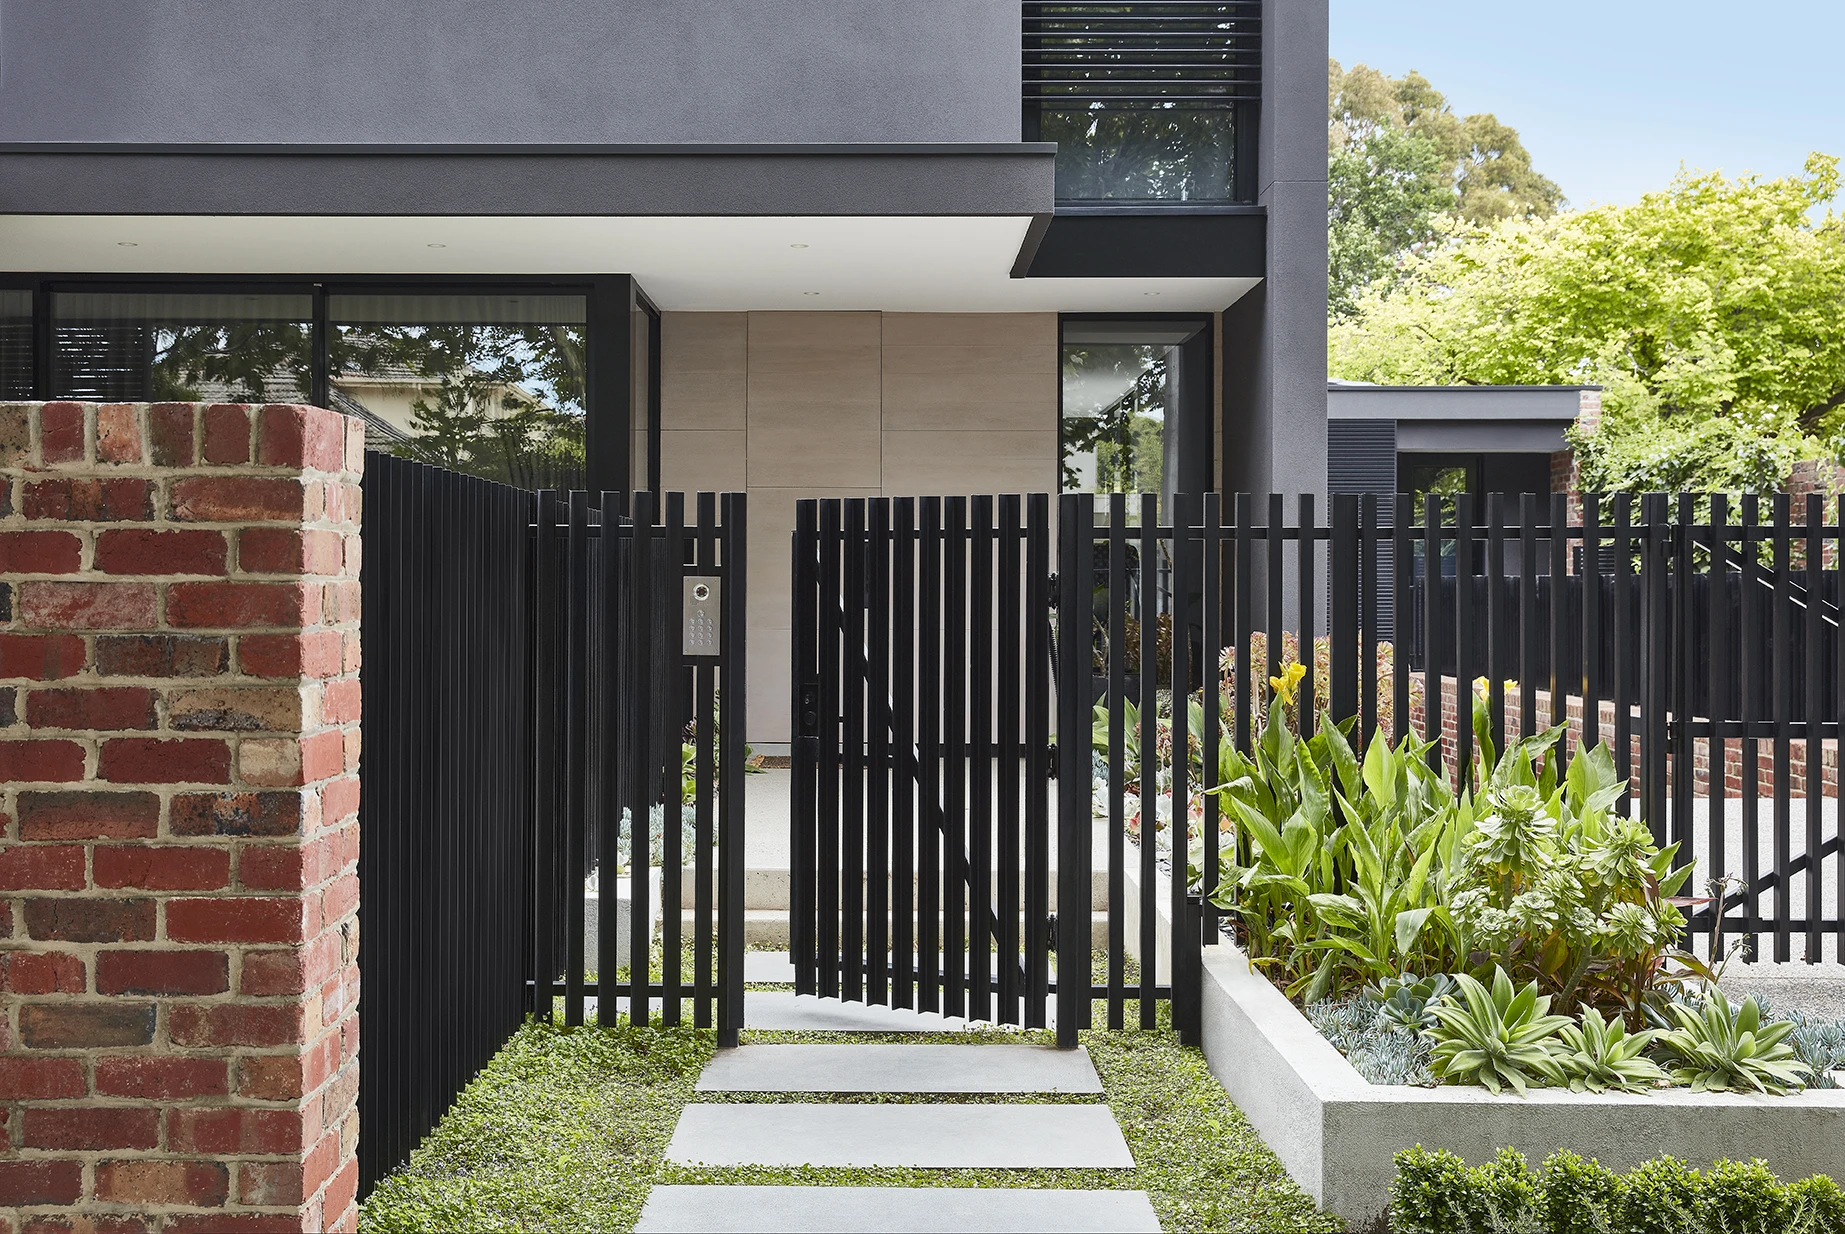 House with metal gates